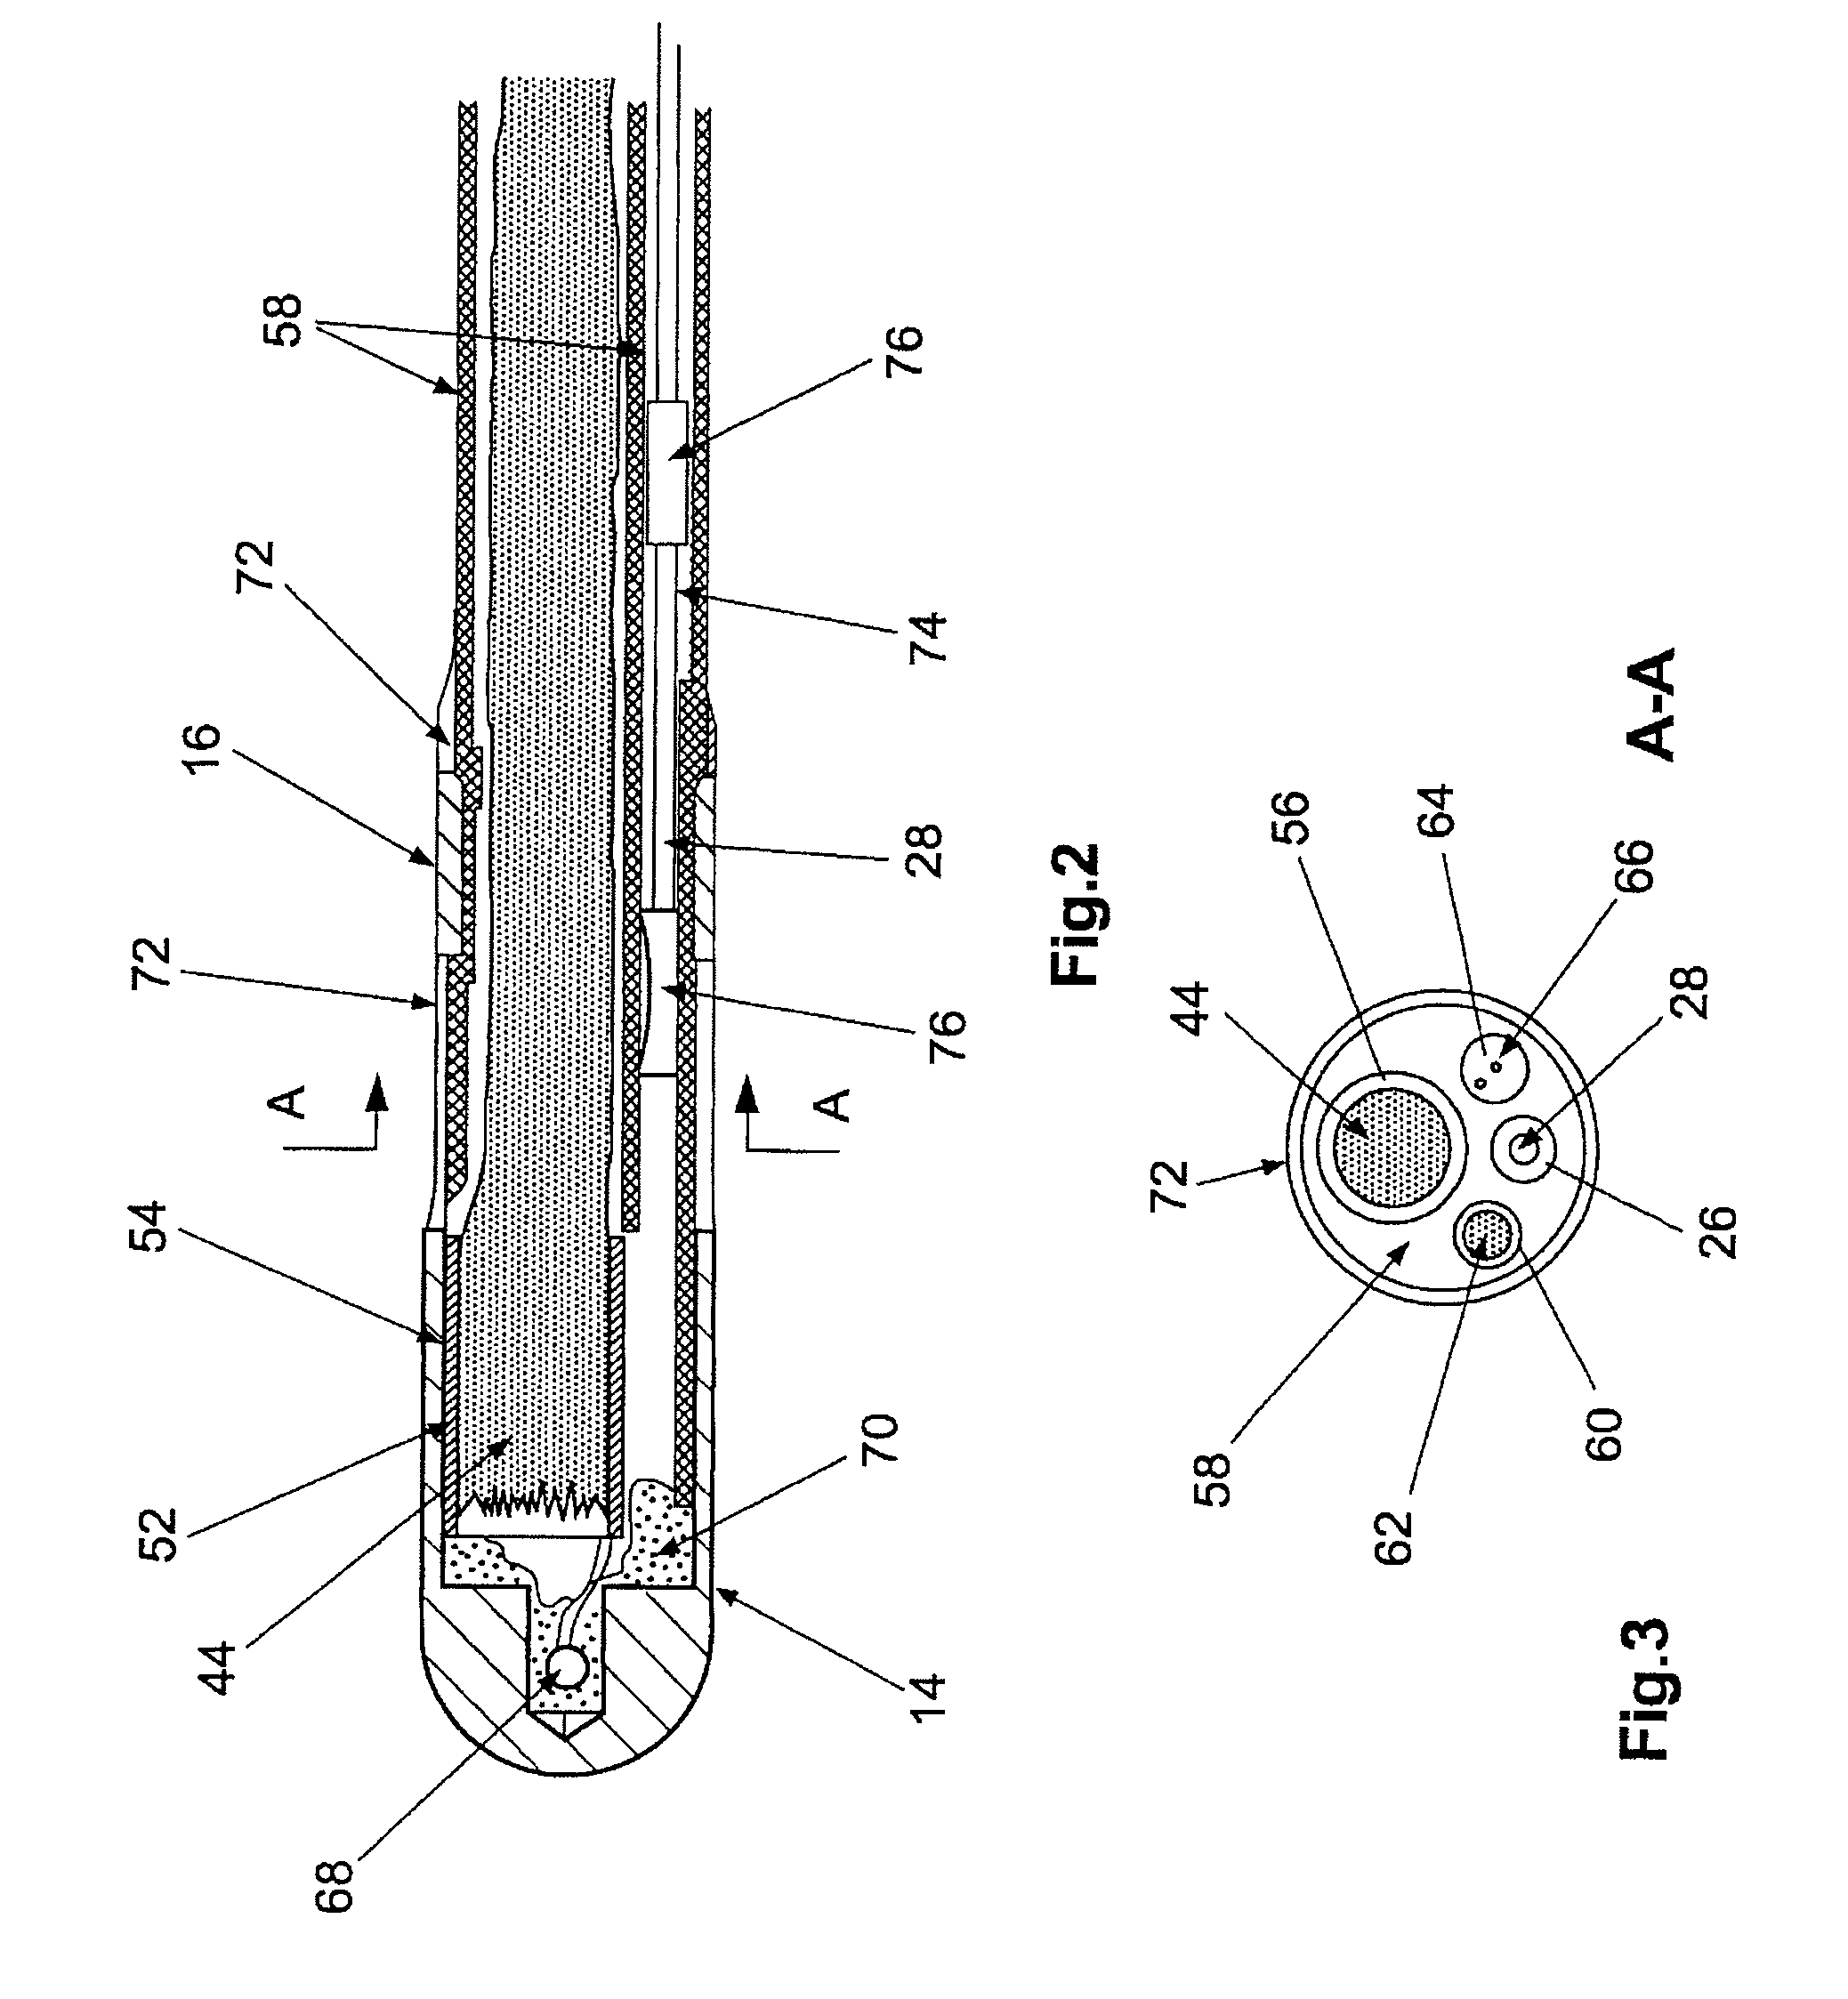 Electrode catheter for the electrotherapy of cardiac tissue